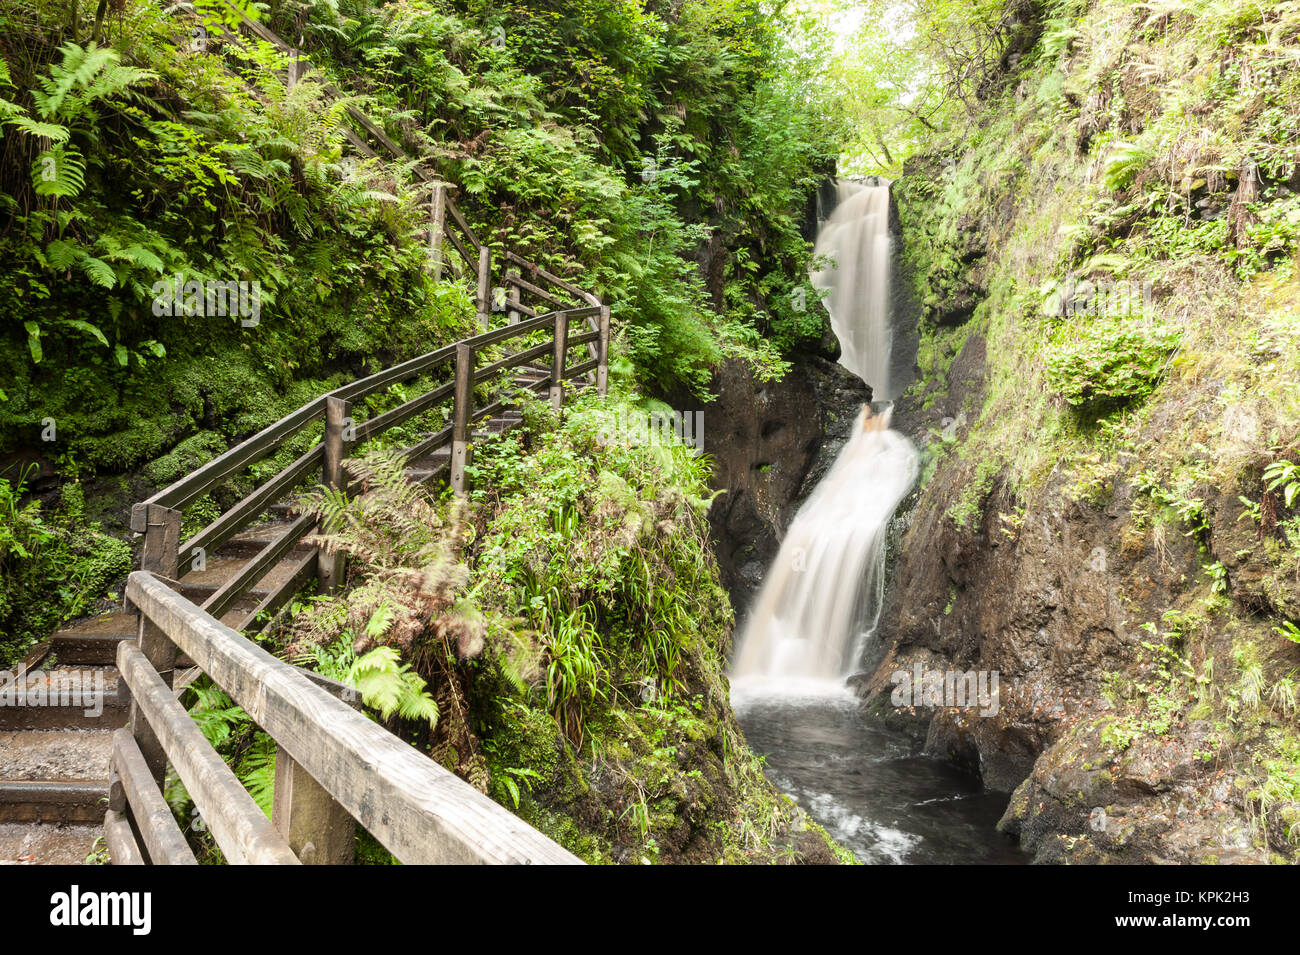 Footpath outdoor trail track with wooden fence next to a small fast flowing waterfall in a gorge in the forest. Glenariff Forest Park, Northern Irelan Stock Photo